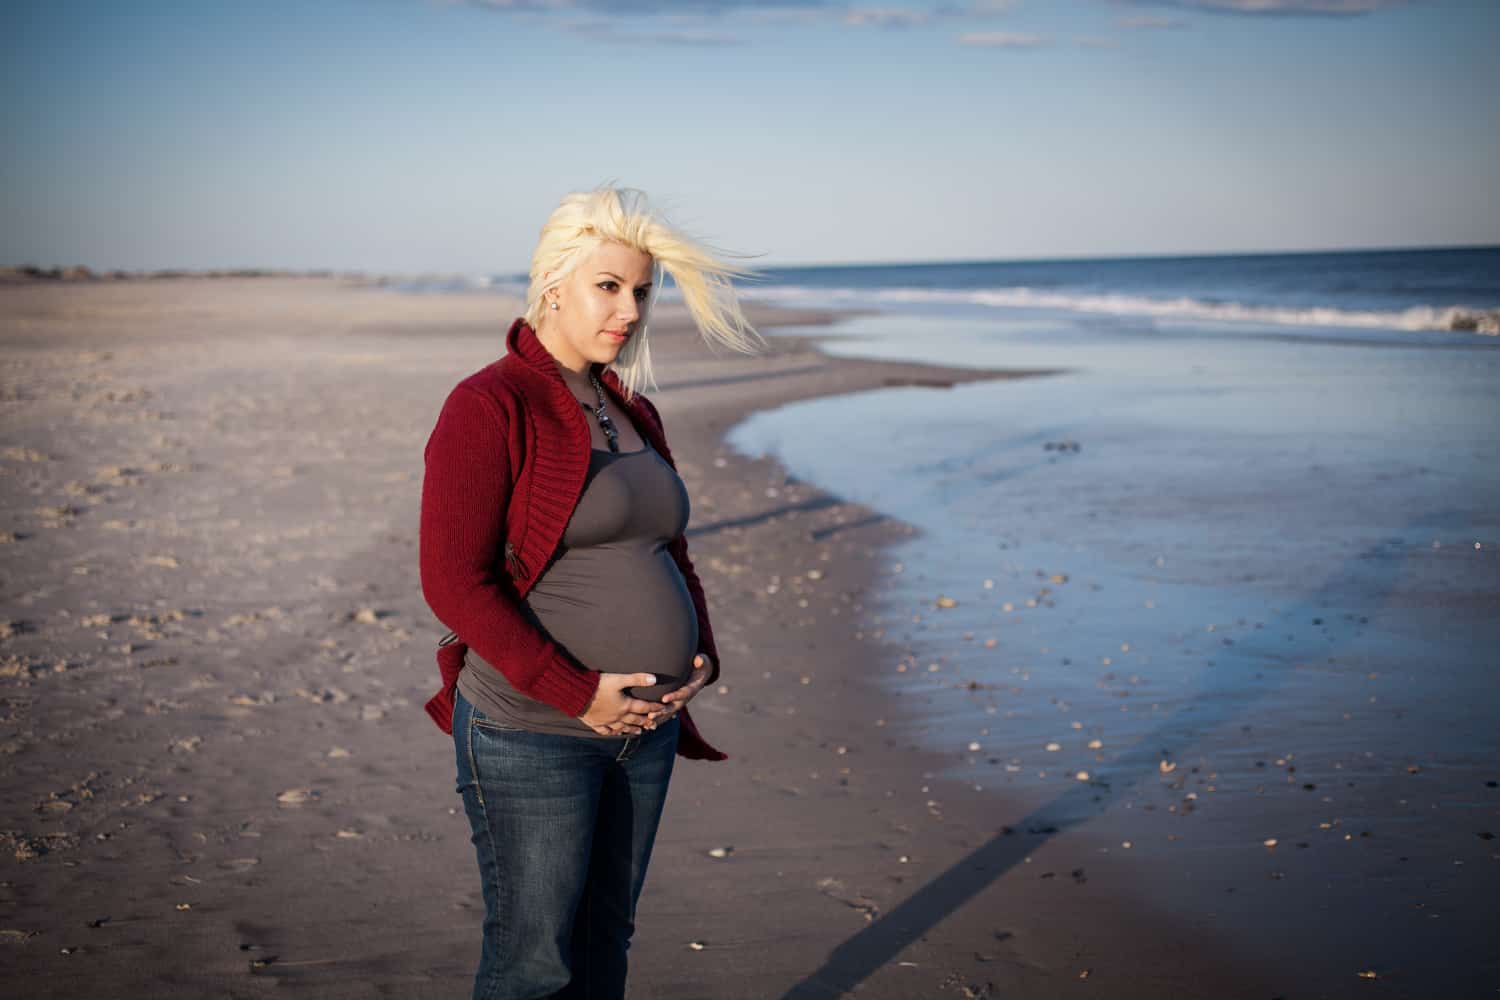 Pregnant blond woman on beach for an article on how to prepare for a maternity photo shoot